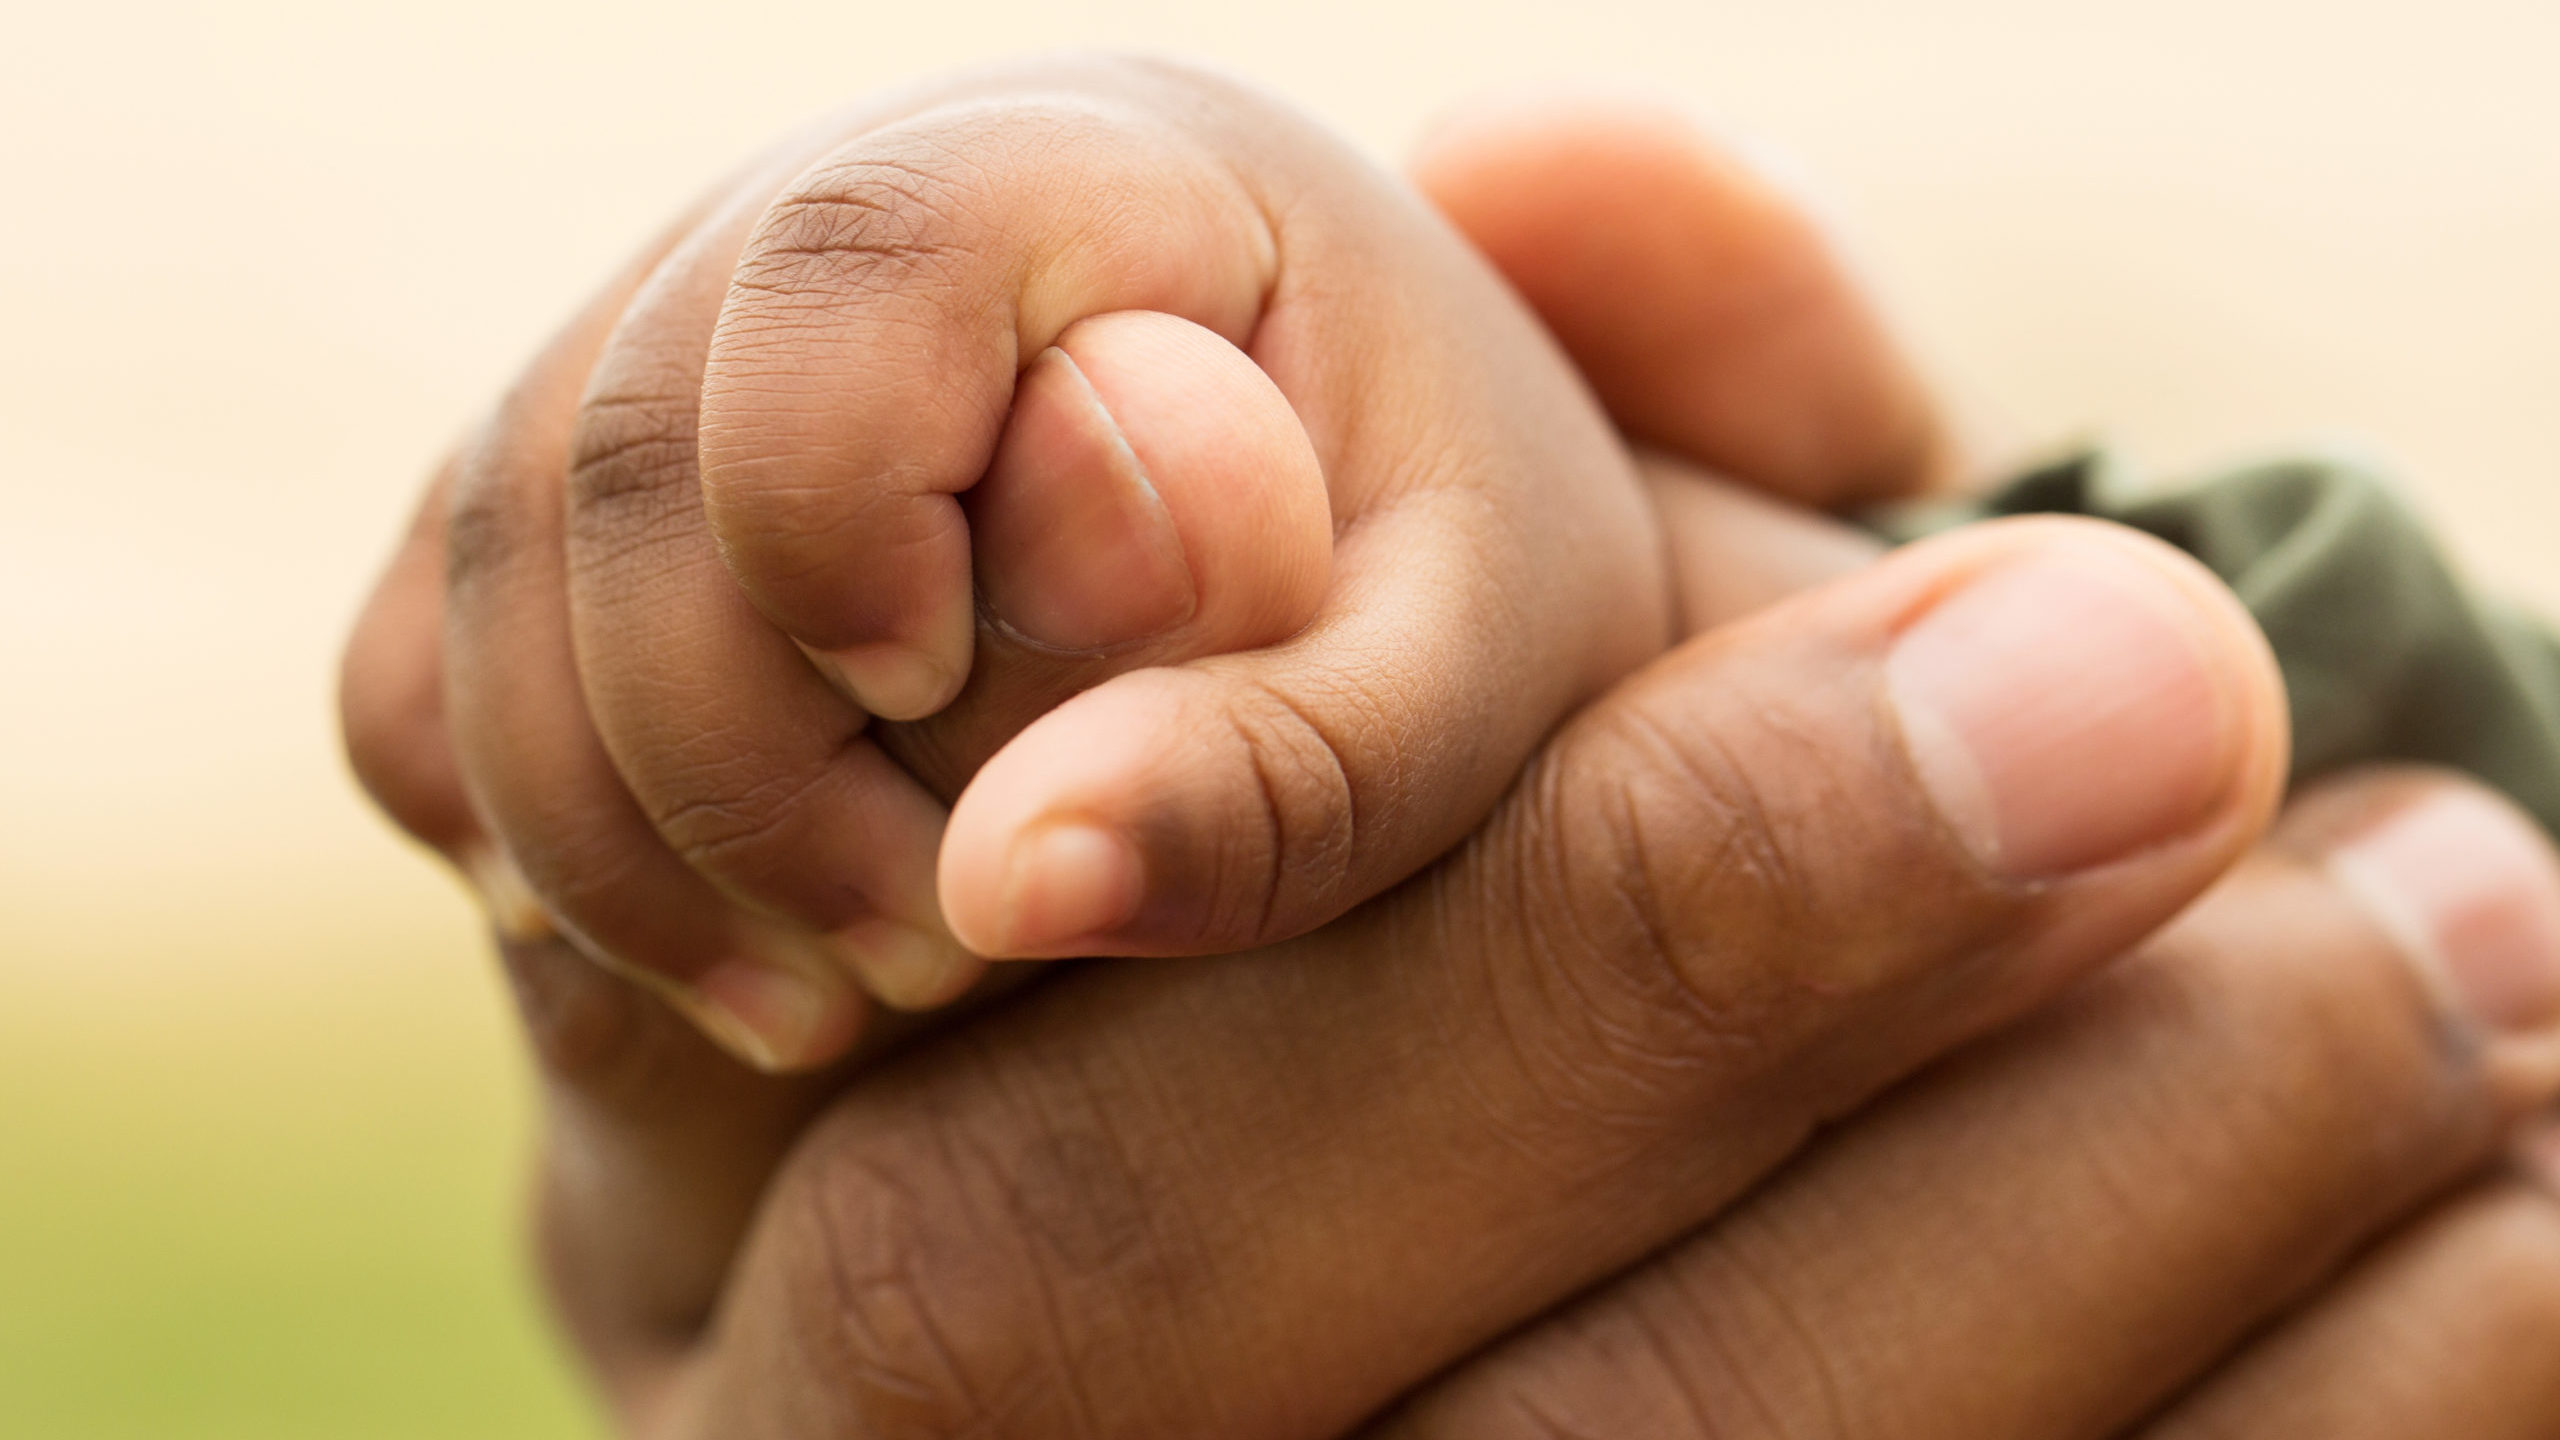 Concept Of Love And Family. Hands Of Mother And Baby Closeup.